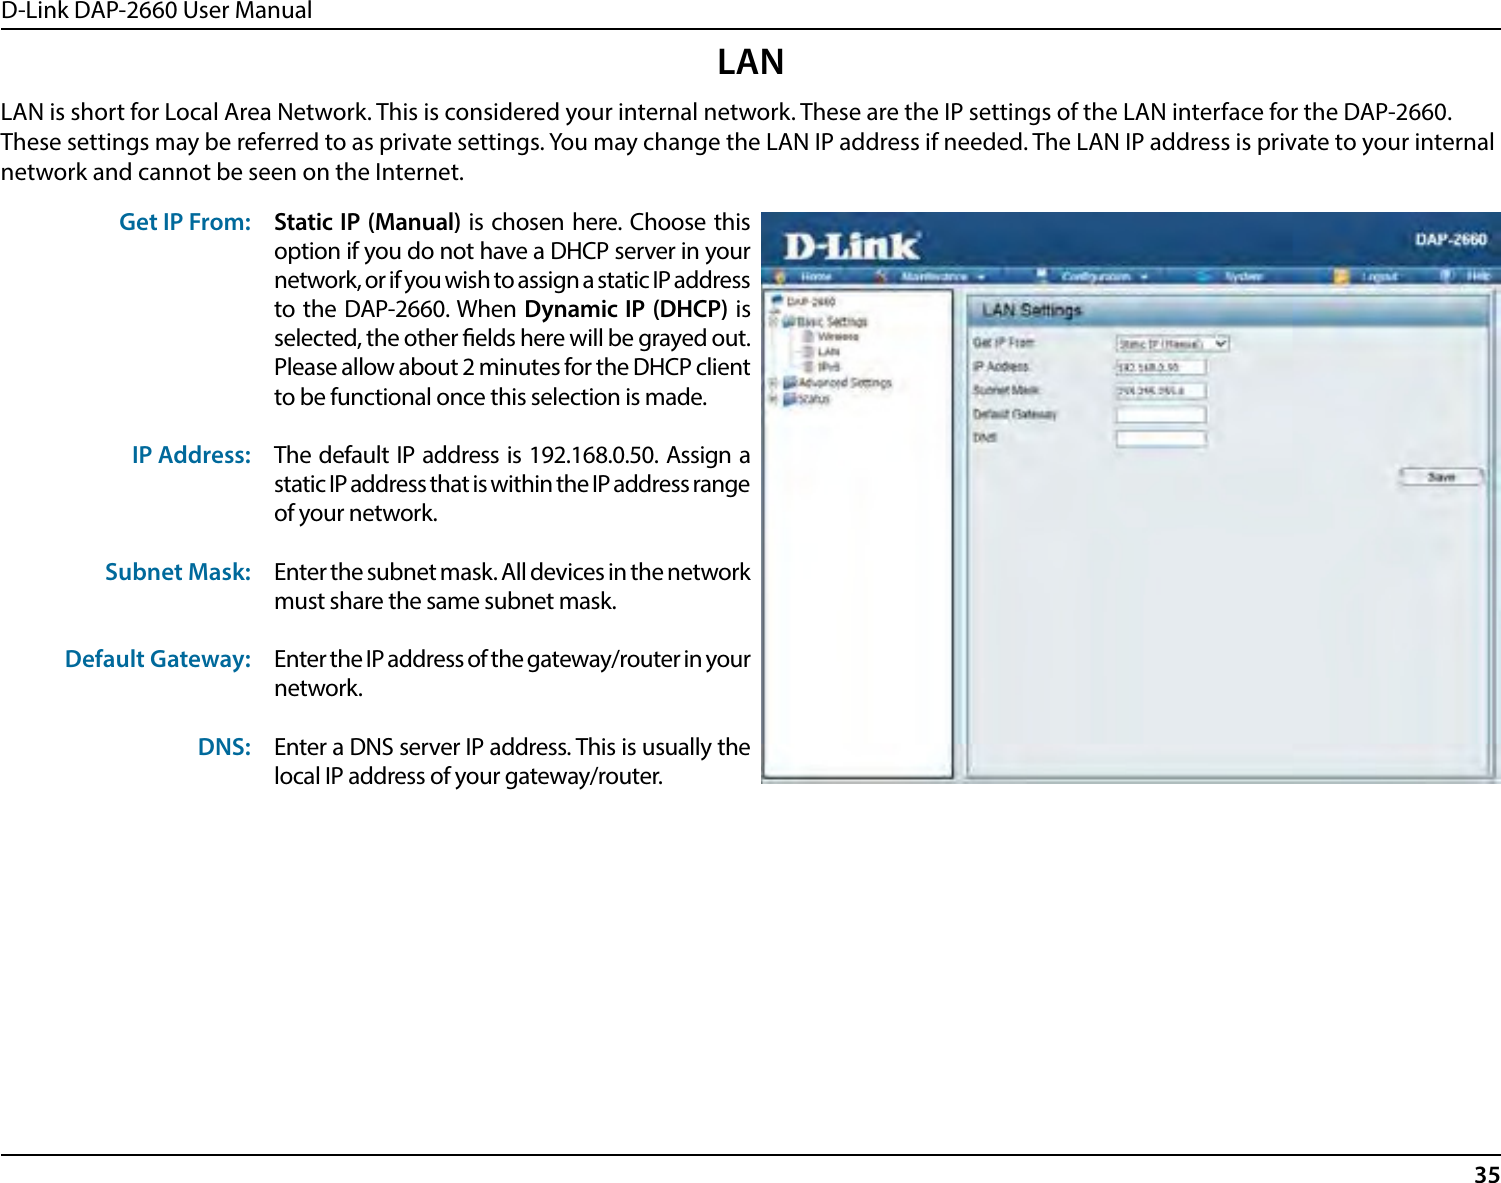 D-Link DAP-2660 User Manual35LANLAN is short for Local Area Network. This is considered your internal network. These are the IP settings of the LAN interface for the DAP-2660. These settings may be referred to as private settings. You may change the LAN IP address if needed. The LAN IP address is private to your internal network and cannot be seen on the Internet.Get IP From:IP Address:Subnet Mask:Default Gateway:DNS:Static IP (Manual) is chosen here. Choose this option if you do not have a DHCP server in your network, or if you wish to assign a static IP address to the DAP-2660. When Dynamic IP (DHCP) is selected, the other elds here will be grayed out. Please allow about 2 minutes for the DHCP client to be functional once this selection is made.The default IP address is 192.168.0.50. Assign a static IP address that is within the IP address range of your network.Enter the subnet mask. All devices in the network must share the same subnet mask.Enter the IP address of the gateway/router in your network. Enter a DNS server IP address. This is usually the local IP address of your gateway/router.